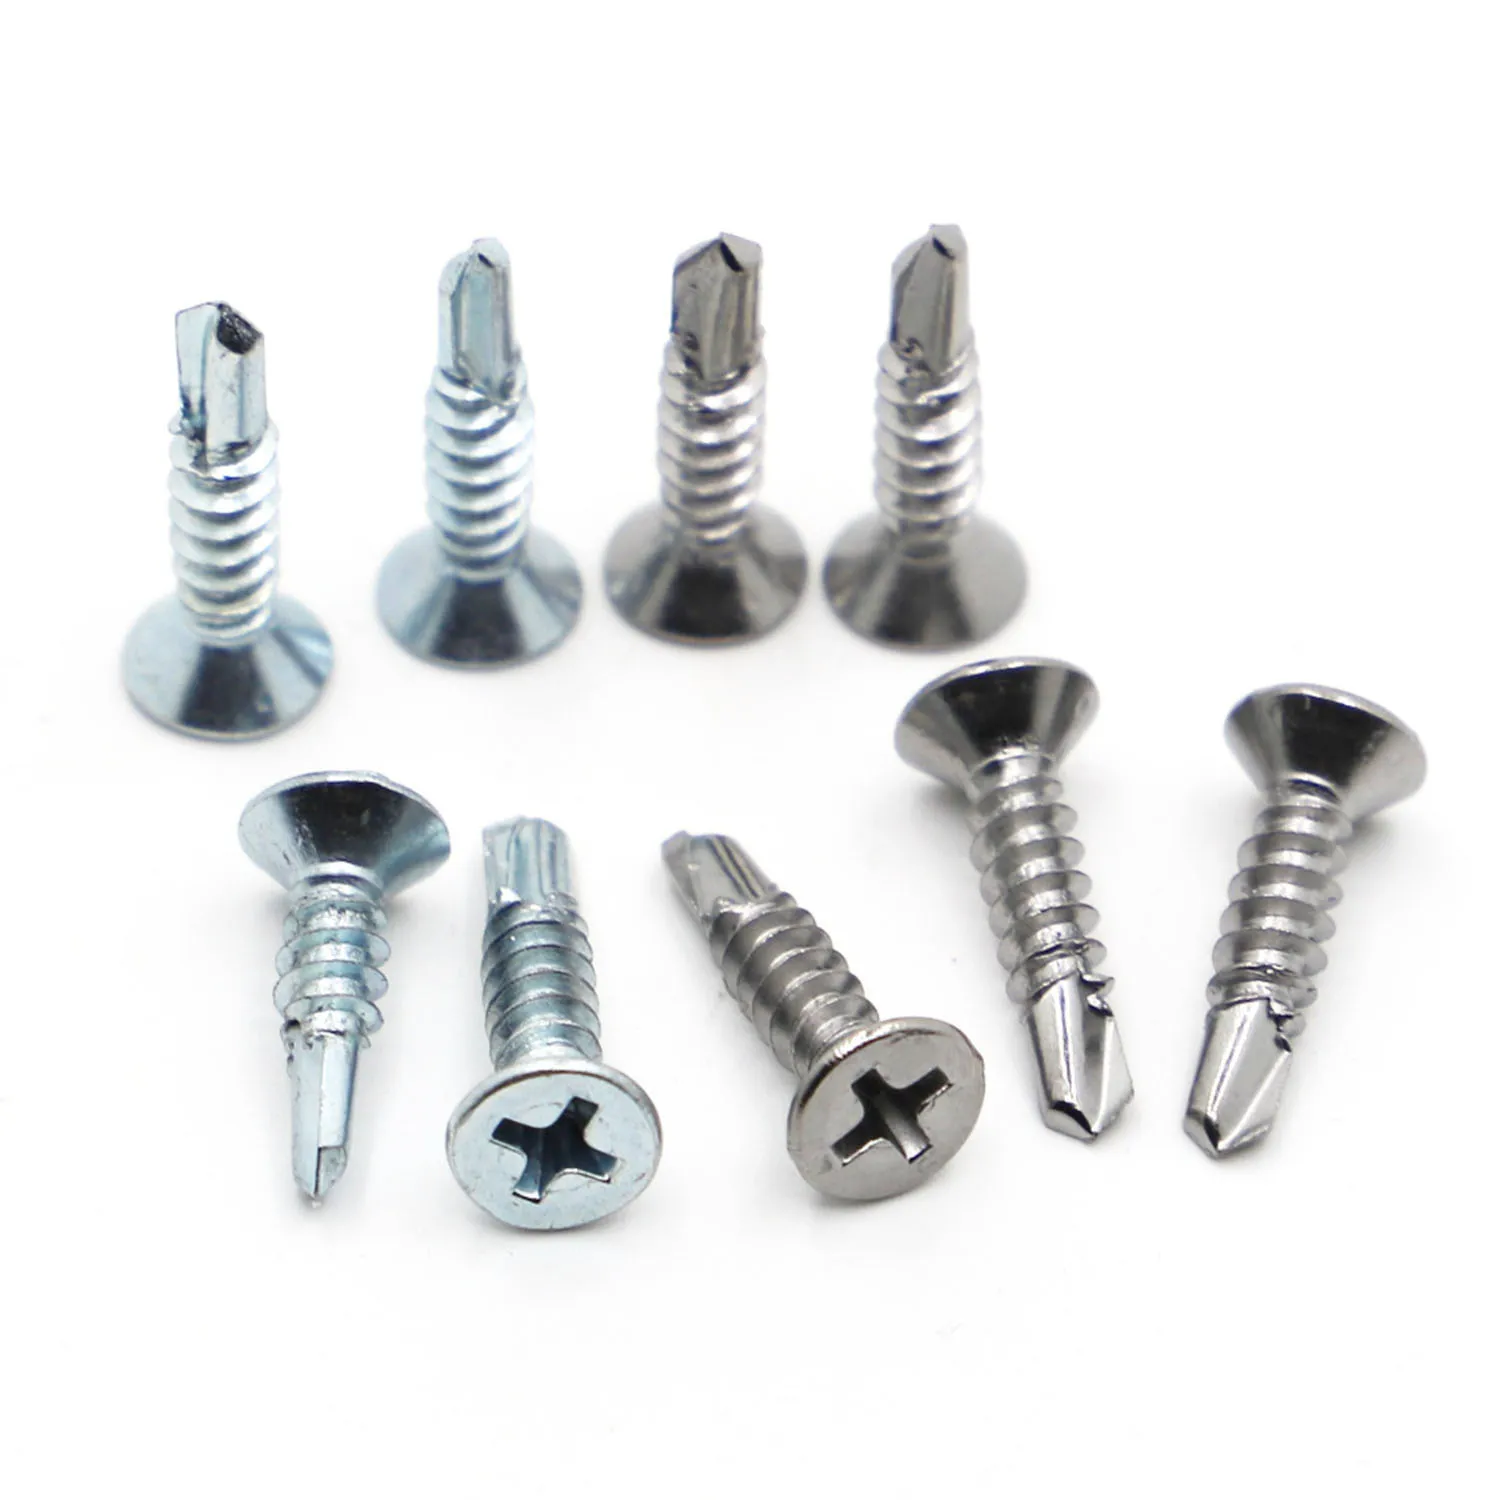 

Phillips Flat Head Self Drilling Screw 410 Stainelss Steel M3.5 M4.2 M4.8 M5.5 M6.3 Zinc Plated Self Tapping Screws